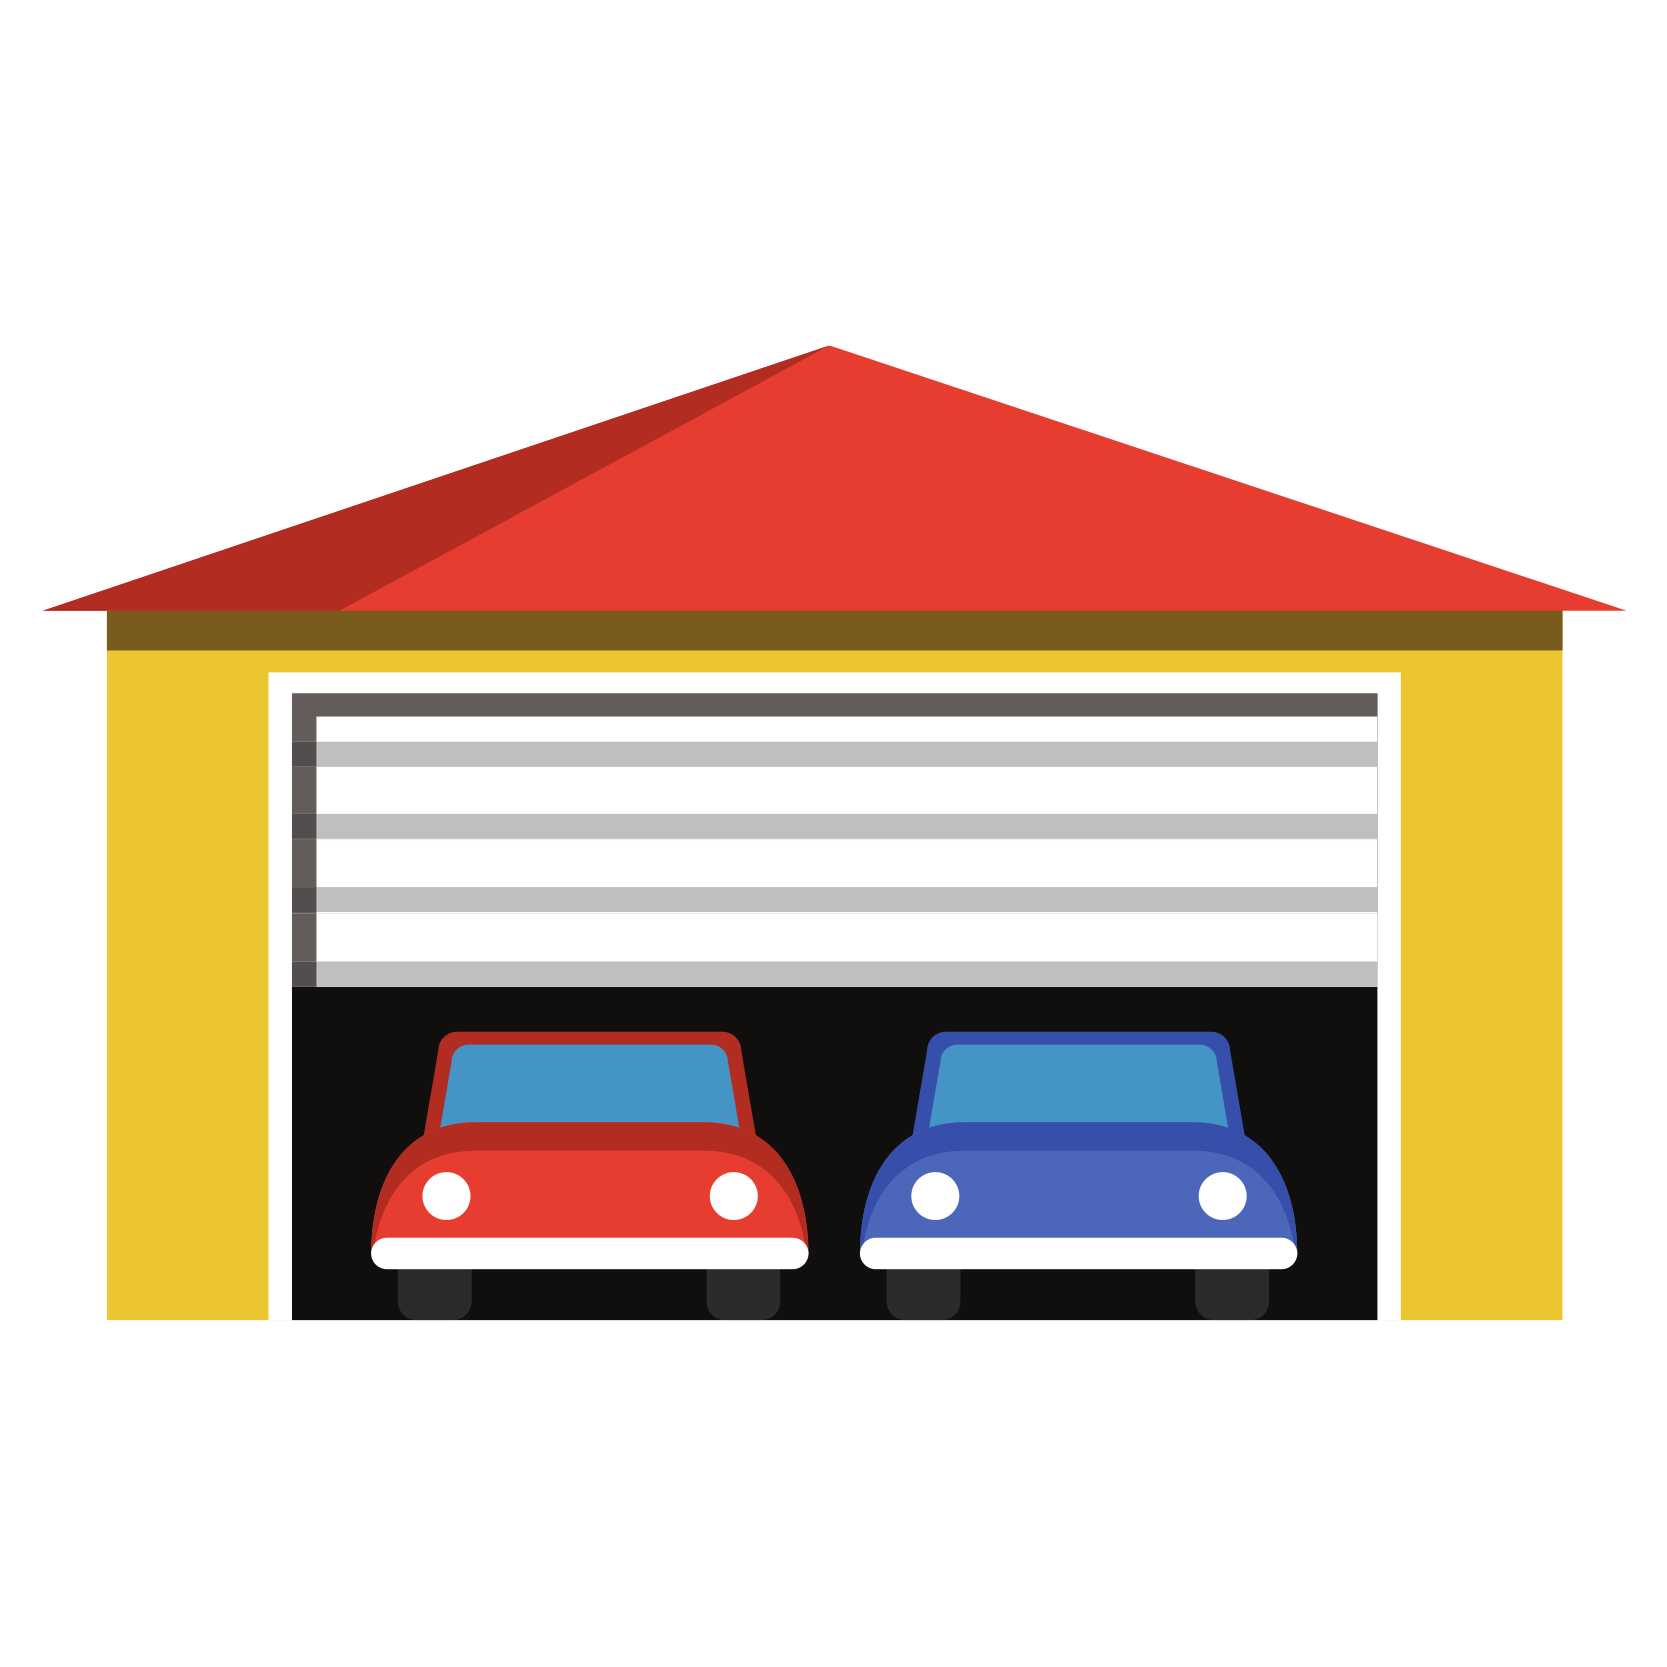 English vocabulary with pictures - Parts of a house - Garage